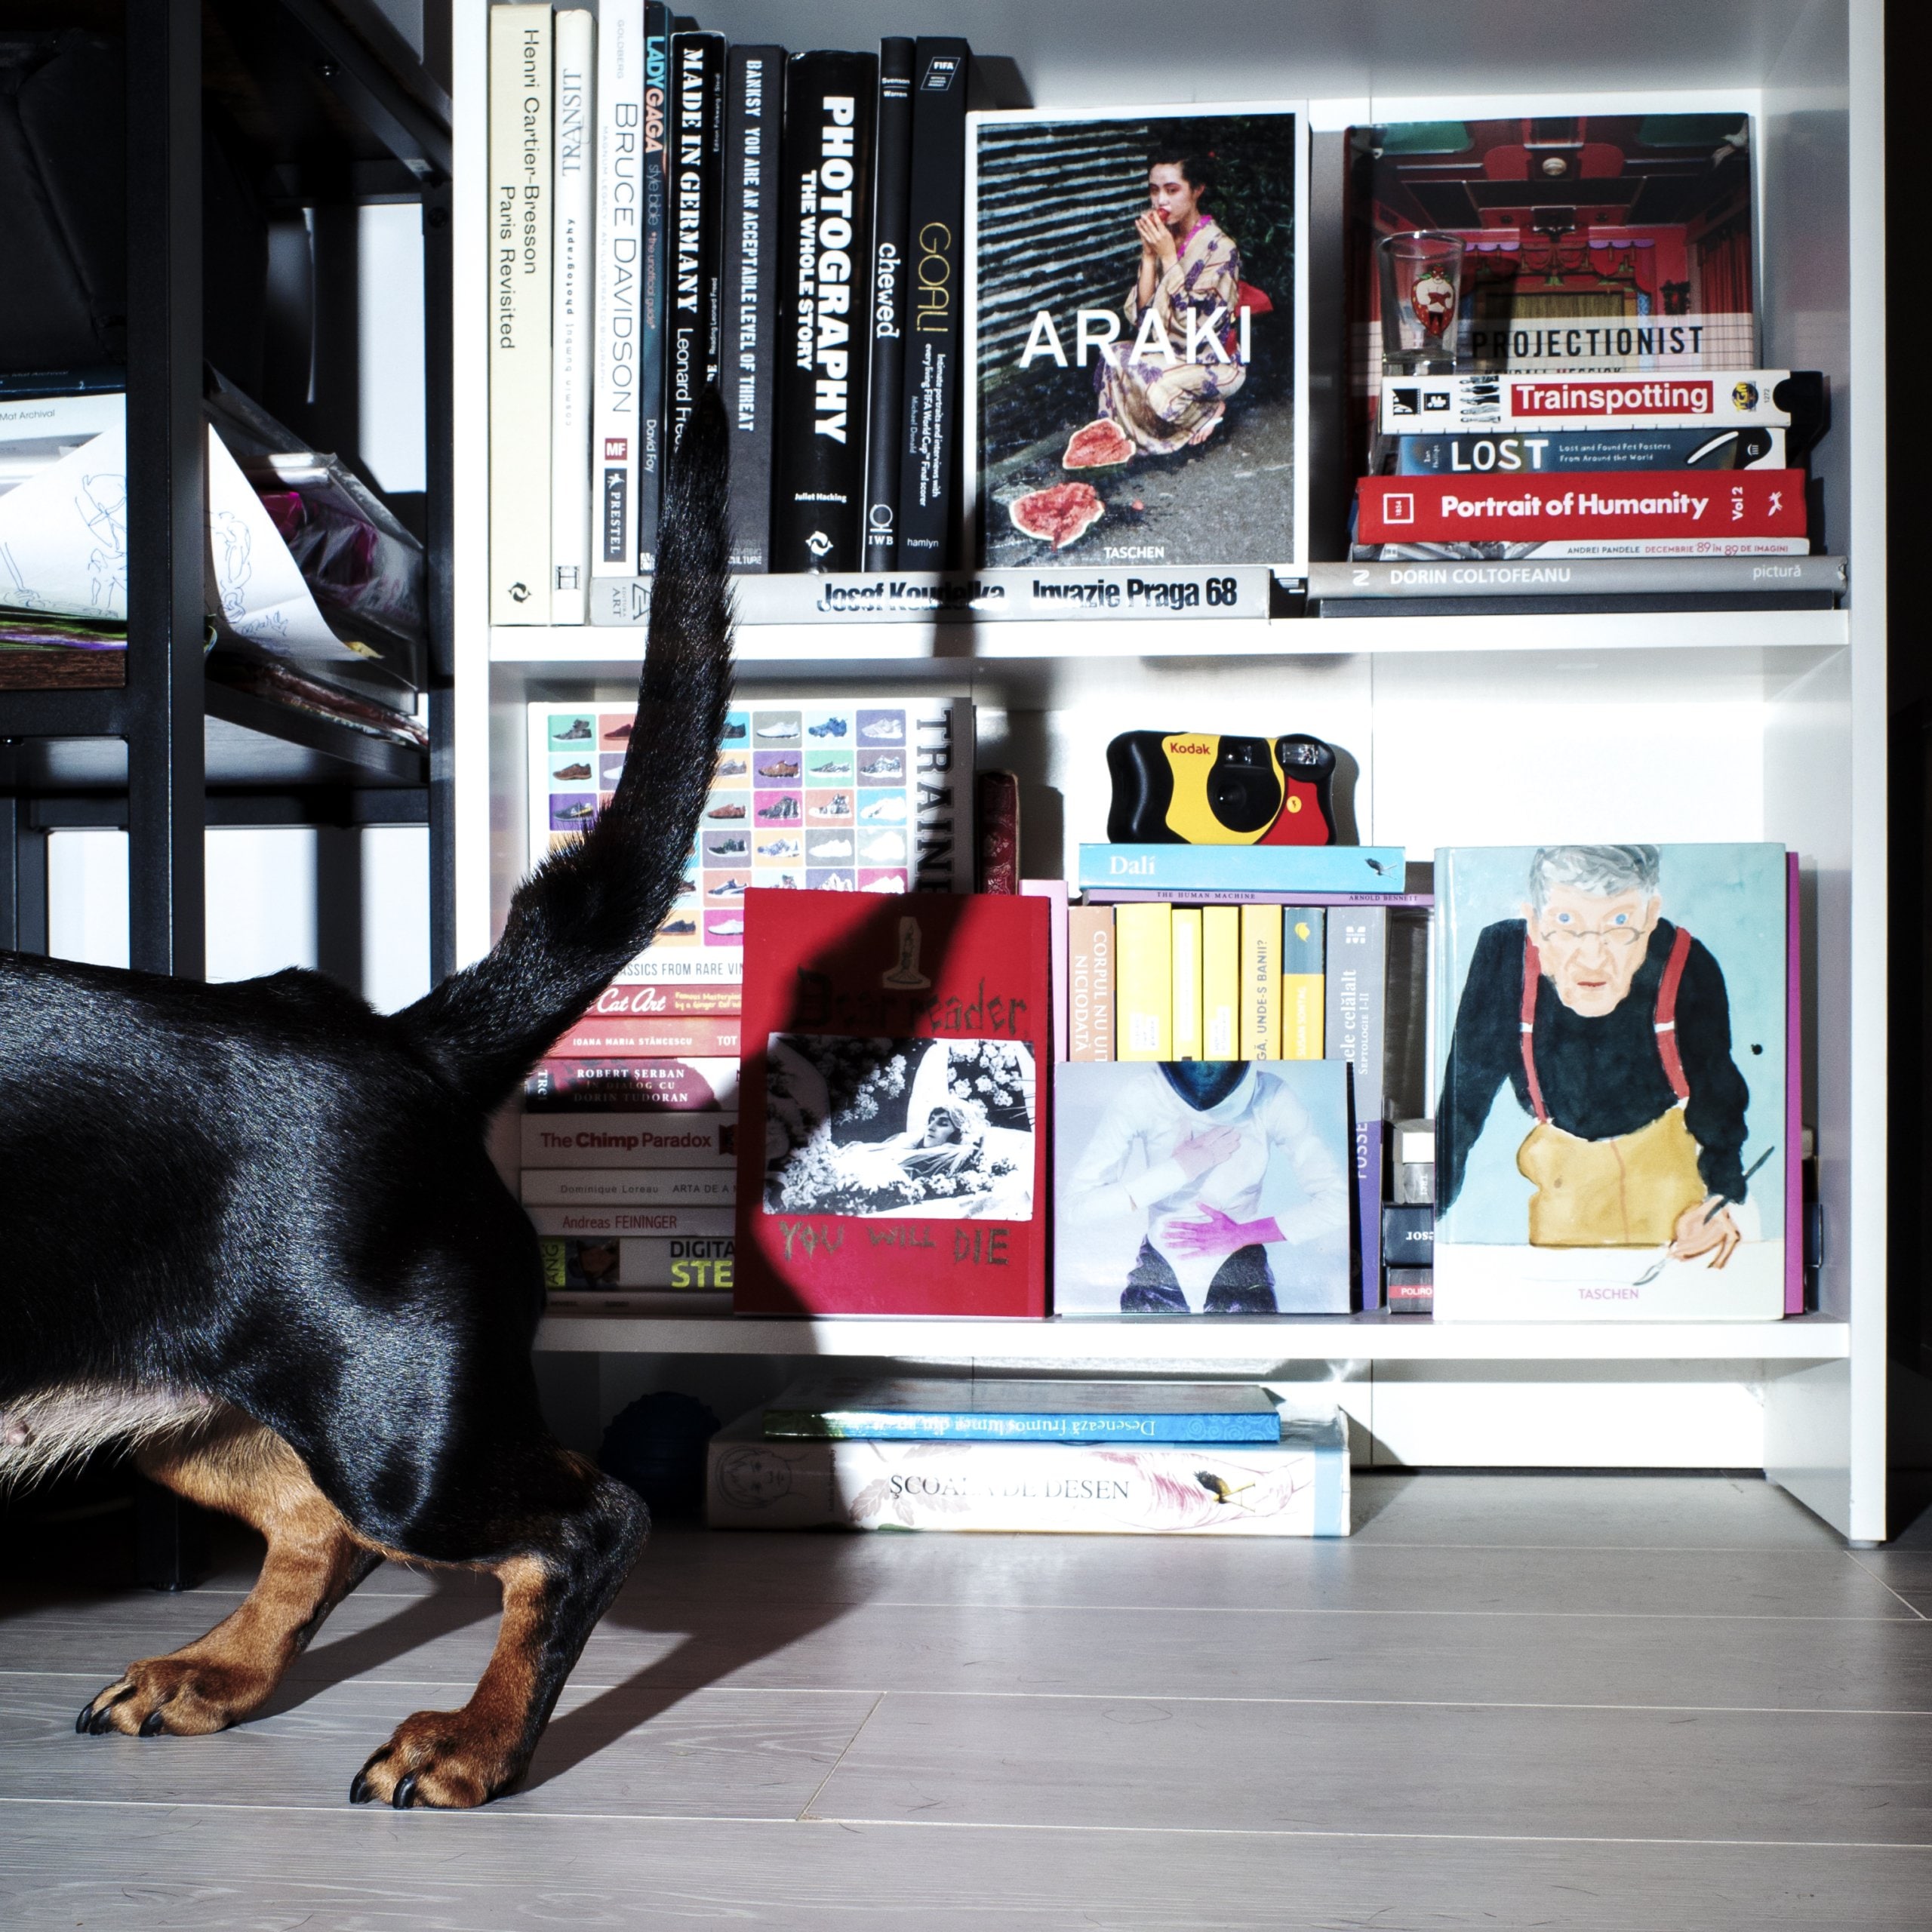 Toma's dachshund standing in front of a bookshelf.